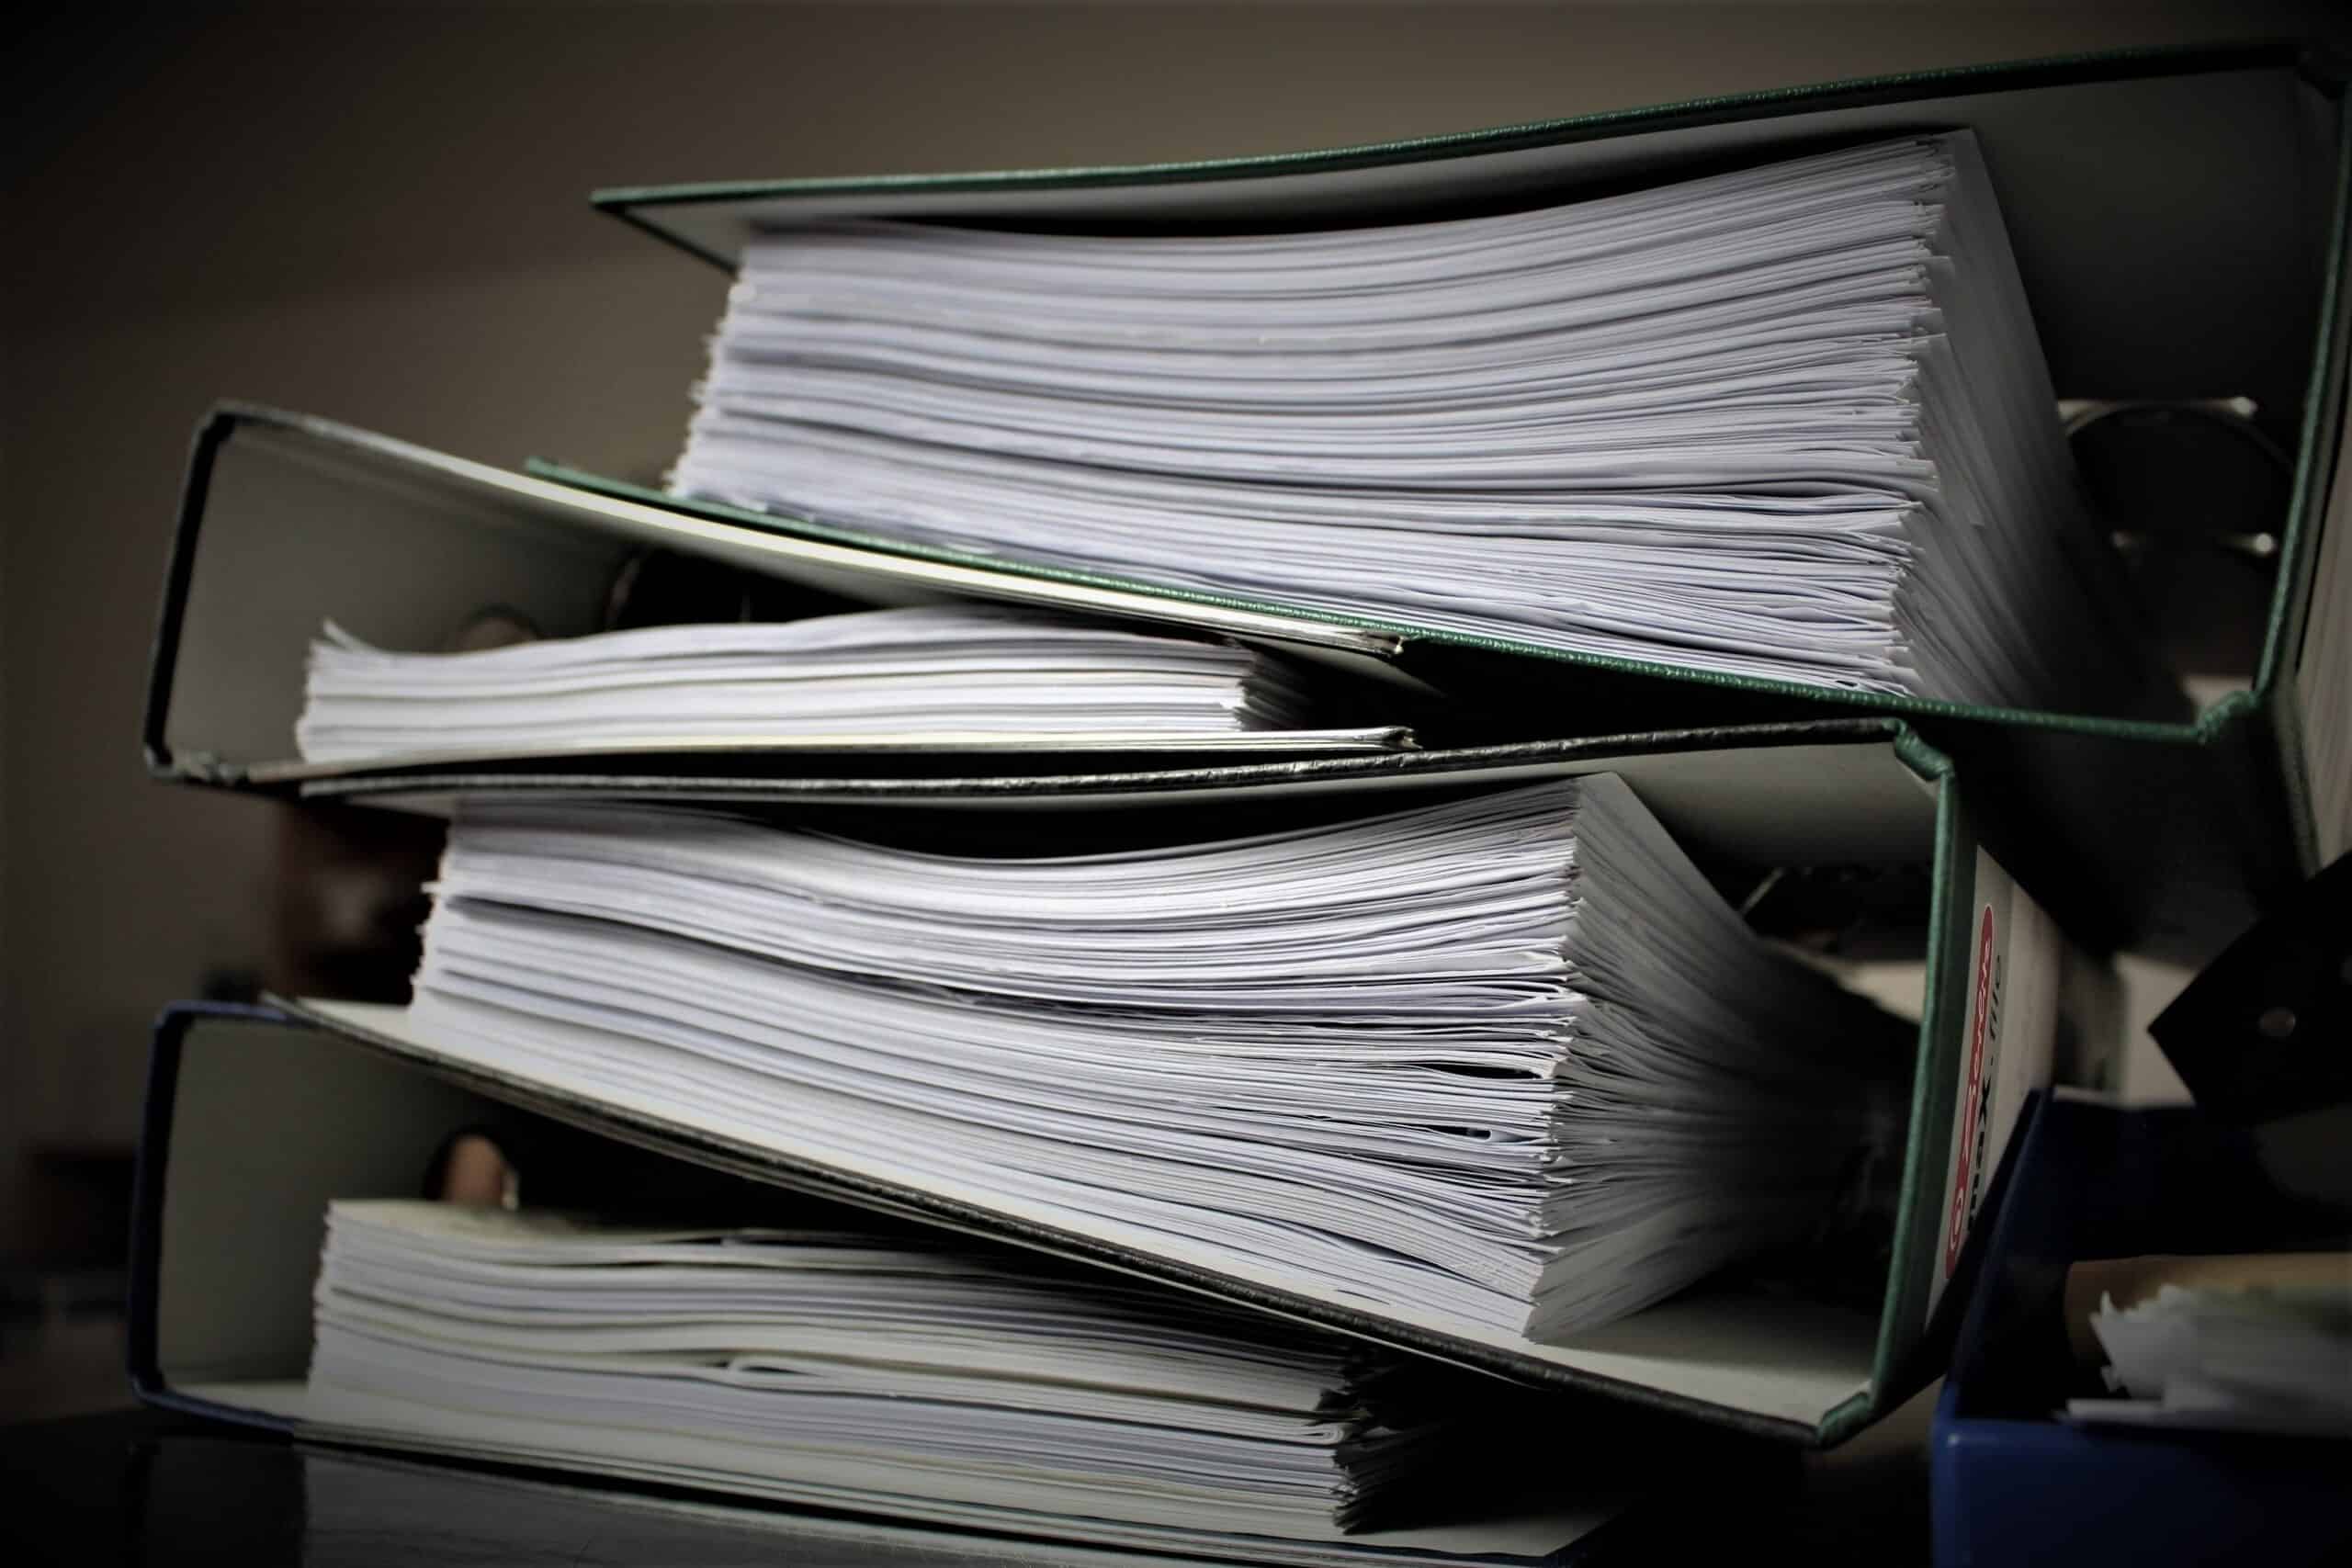 5 Ways A Proper Document Management System Can Reduce Costs 